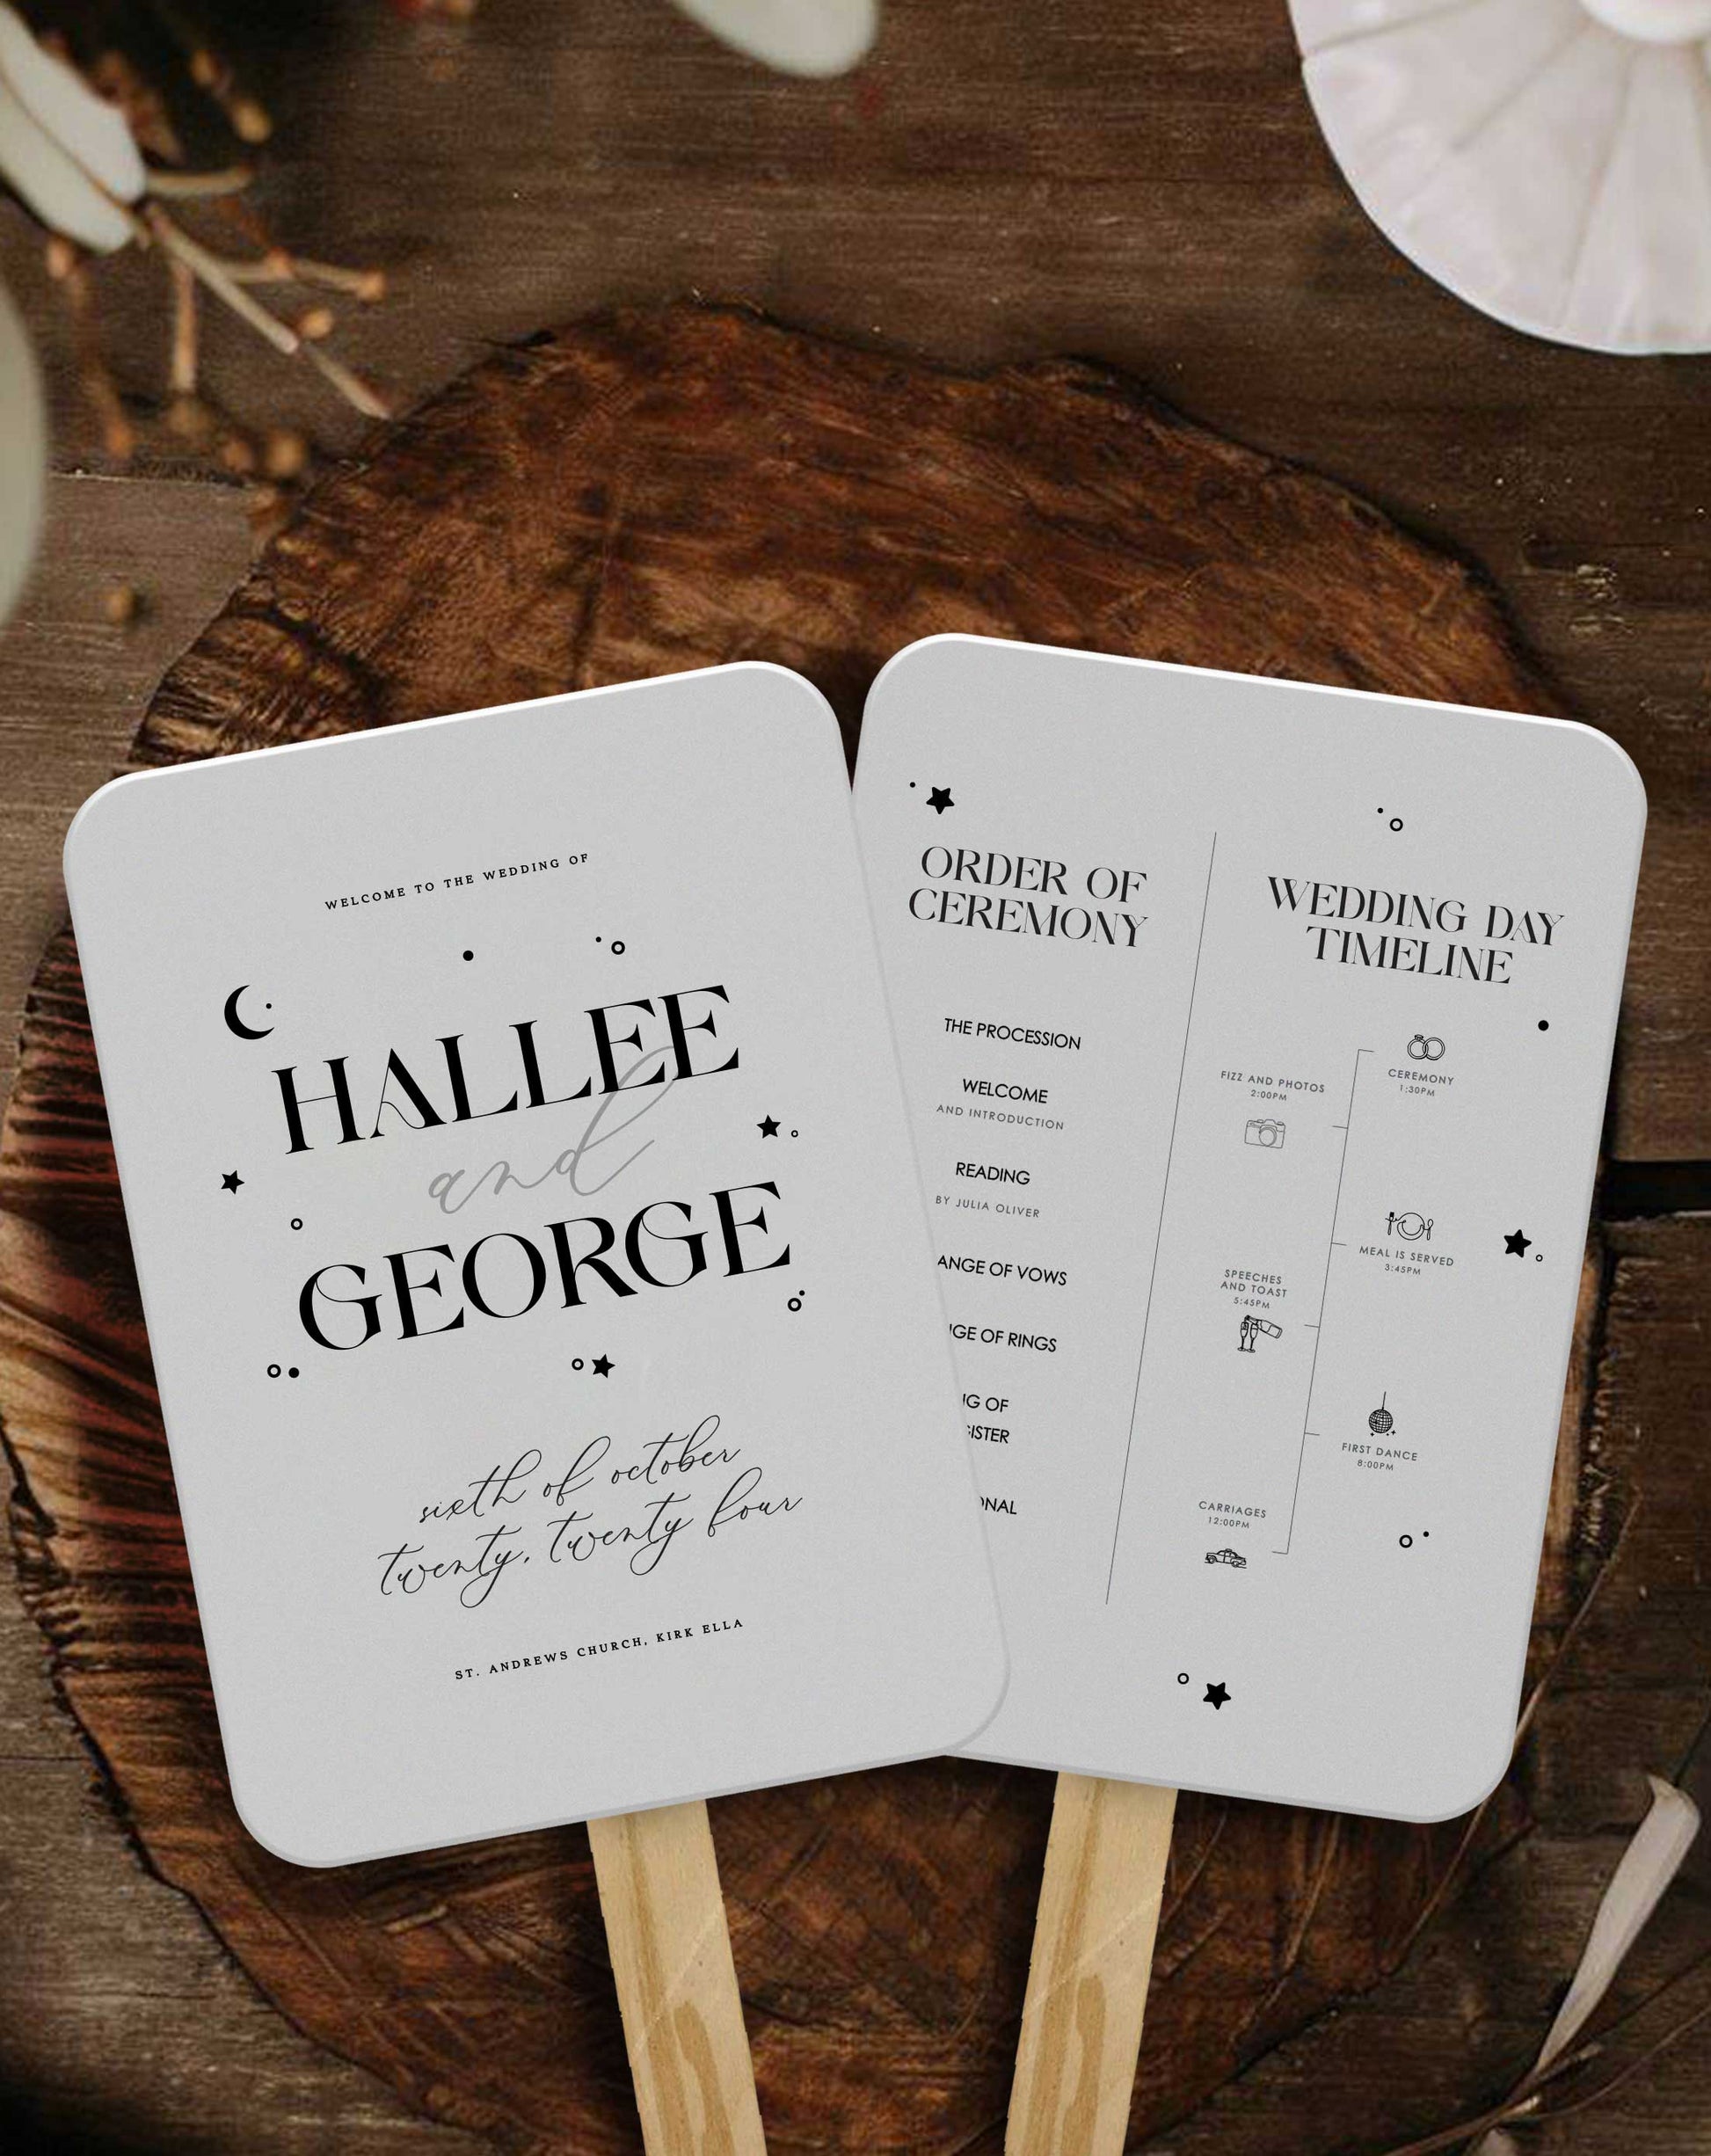 Hallee | Celestial Order Of Service - Ivy and Gold Wedding Stationery